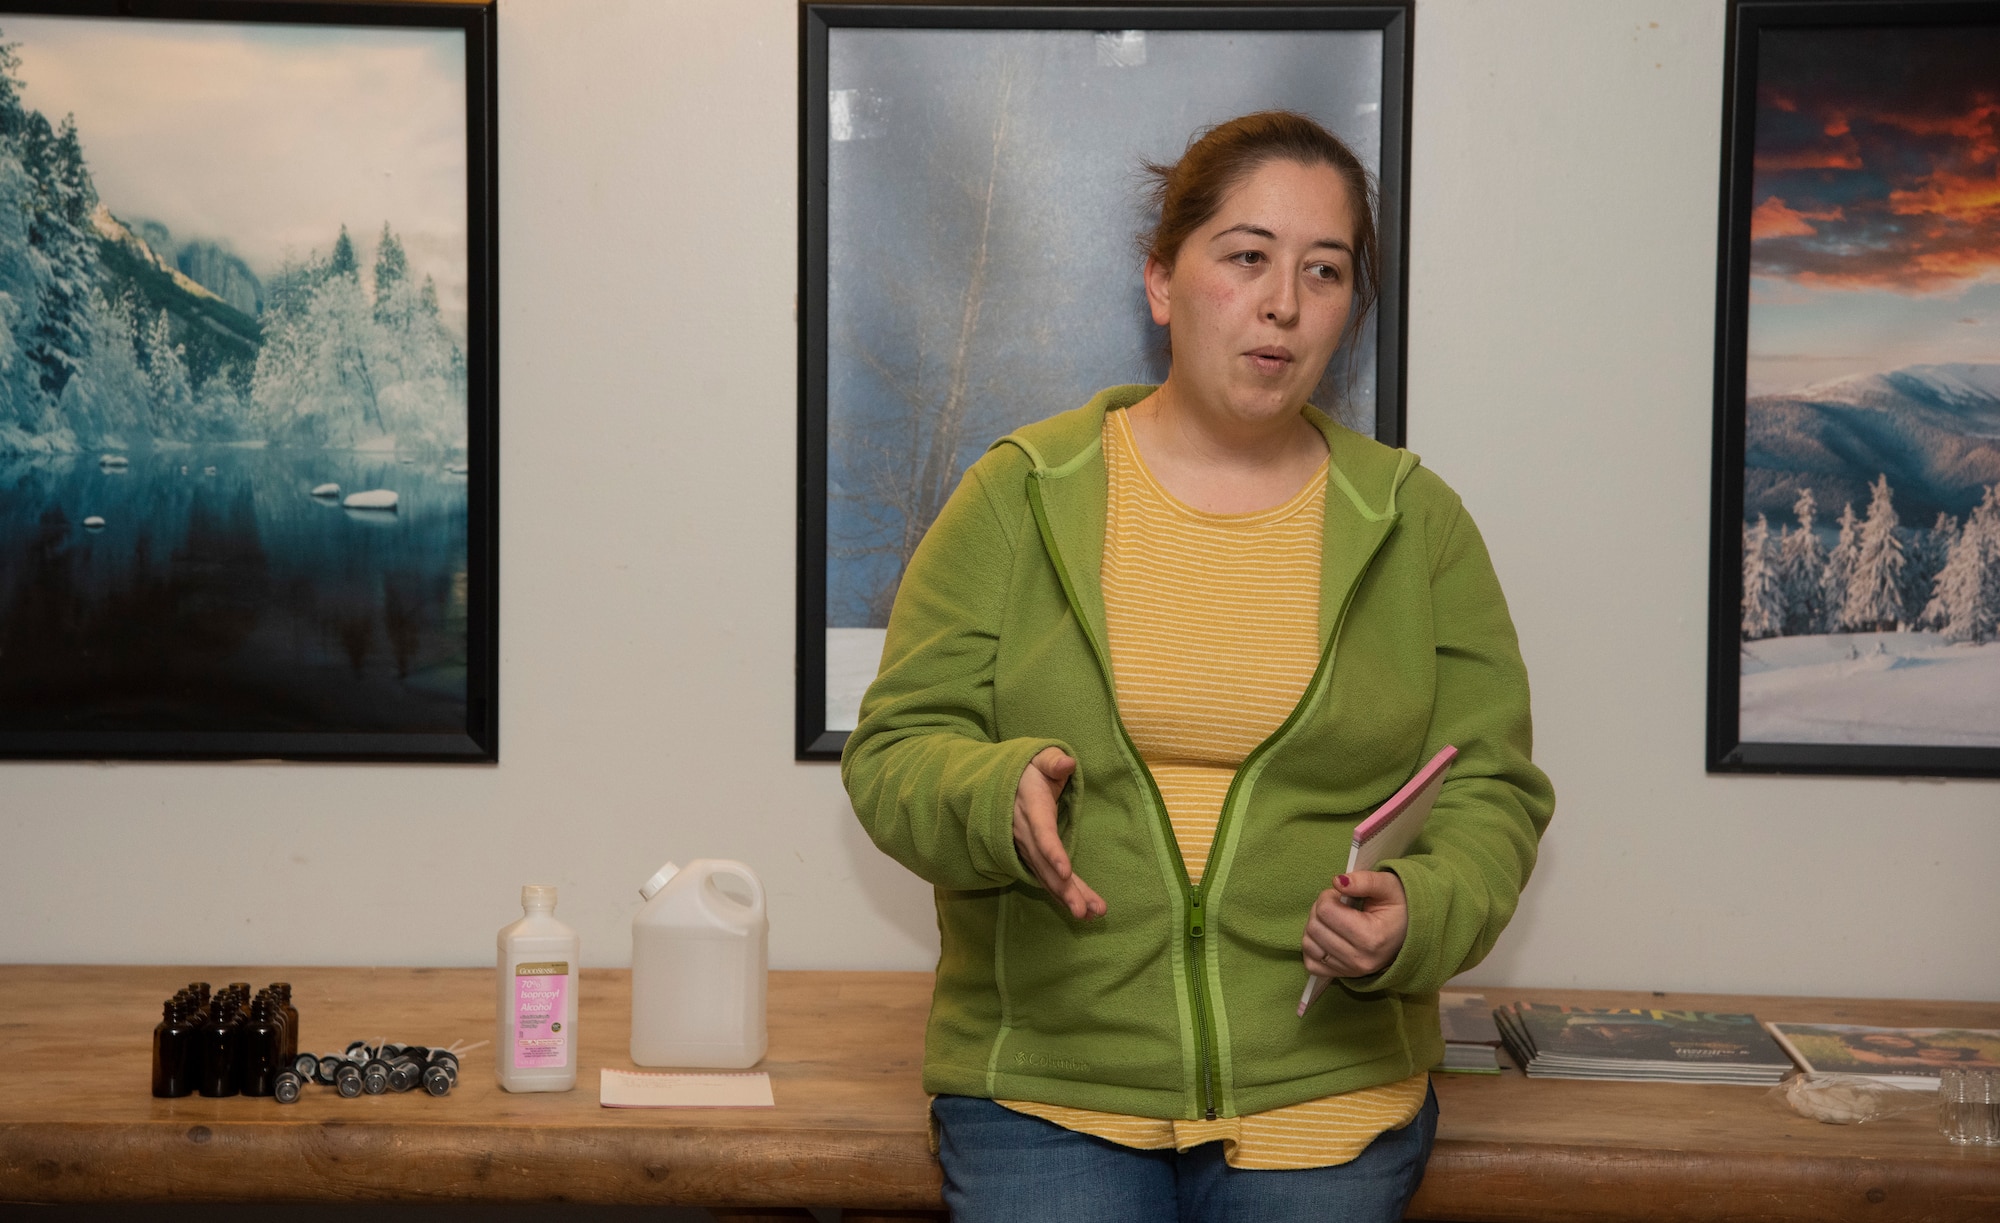 Alice Mizer, a Misawa area language instructor and essential oils guide, introduces herself during an essential oils class at Misawa Air Base, Japan, March 12, 2019. Nine attendees came together and learned how to make a mixture of lavender, lemon or peppermint rollers as well as “poopouri” spray, which is used to extinguish bad bathroom smells. (U.S. Air Force photo by Senior Airman Sadie Colbert)